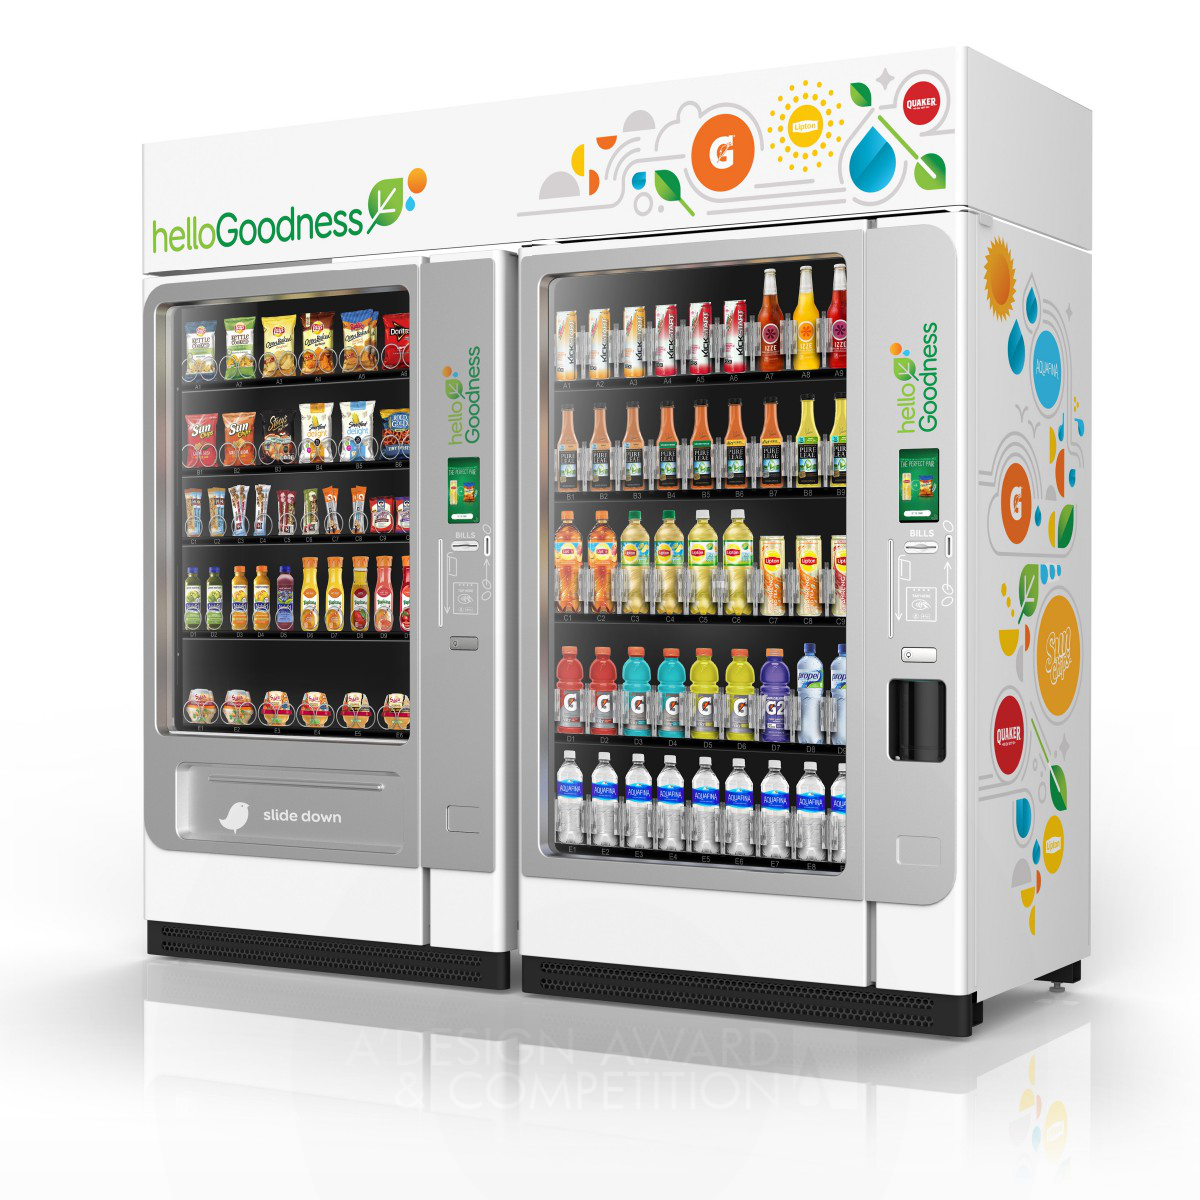 Hello Goodness Vending Machine by PepsiCo Design and Innovation